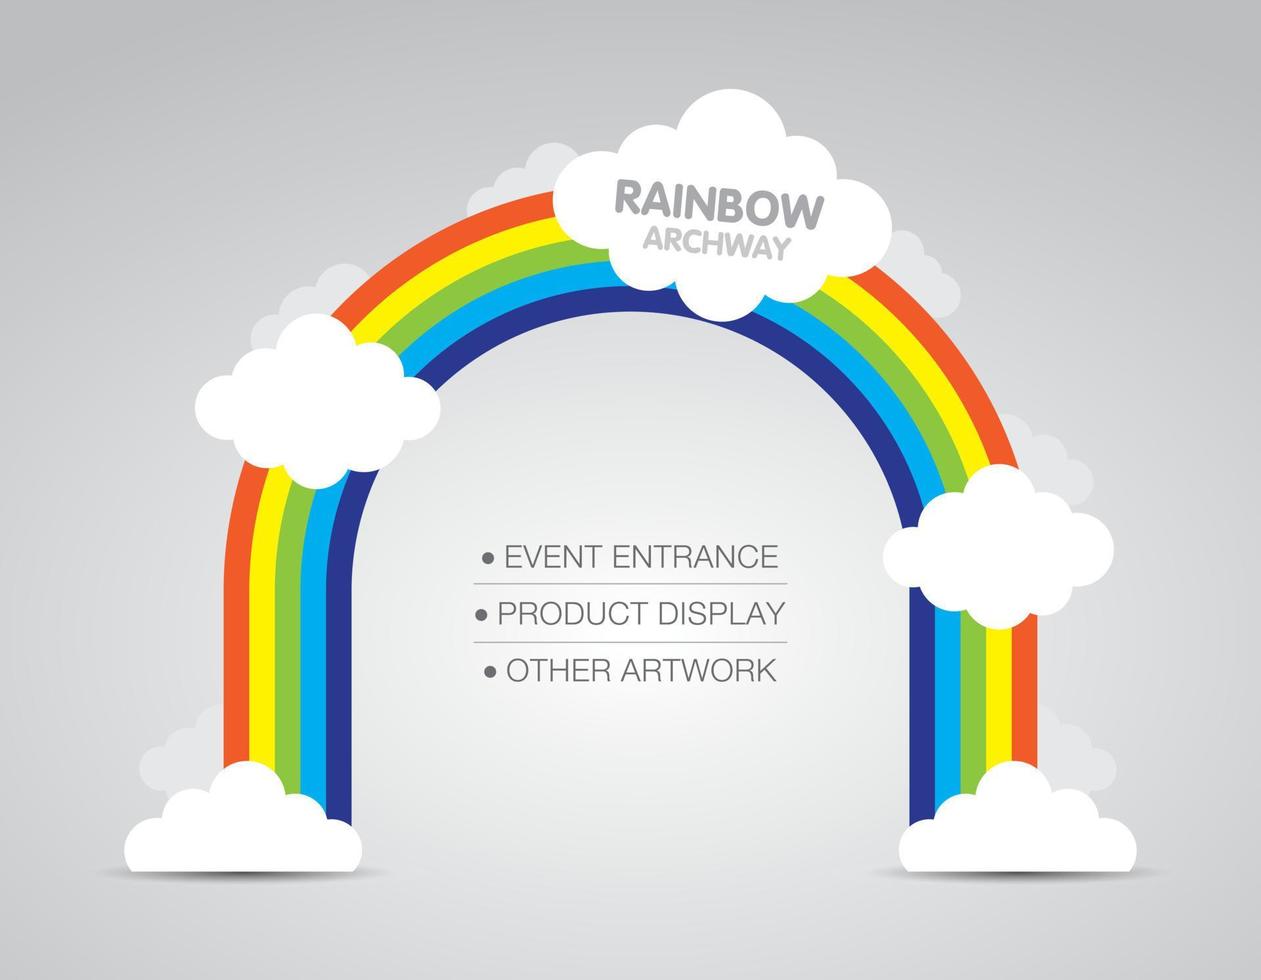 Rainbow with cloud archway graphic vector for designing event entrance, product display or other artwork.